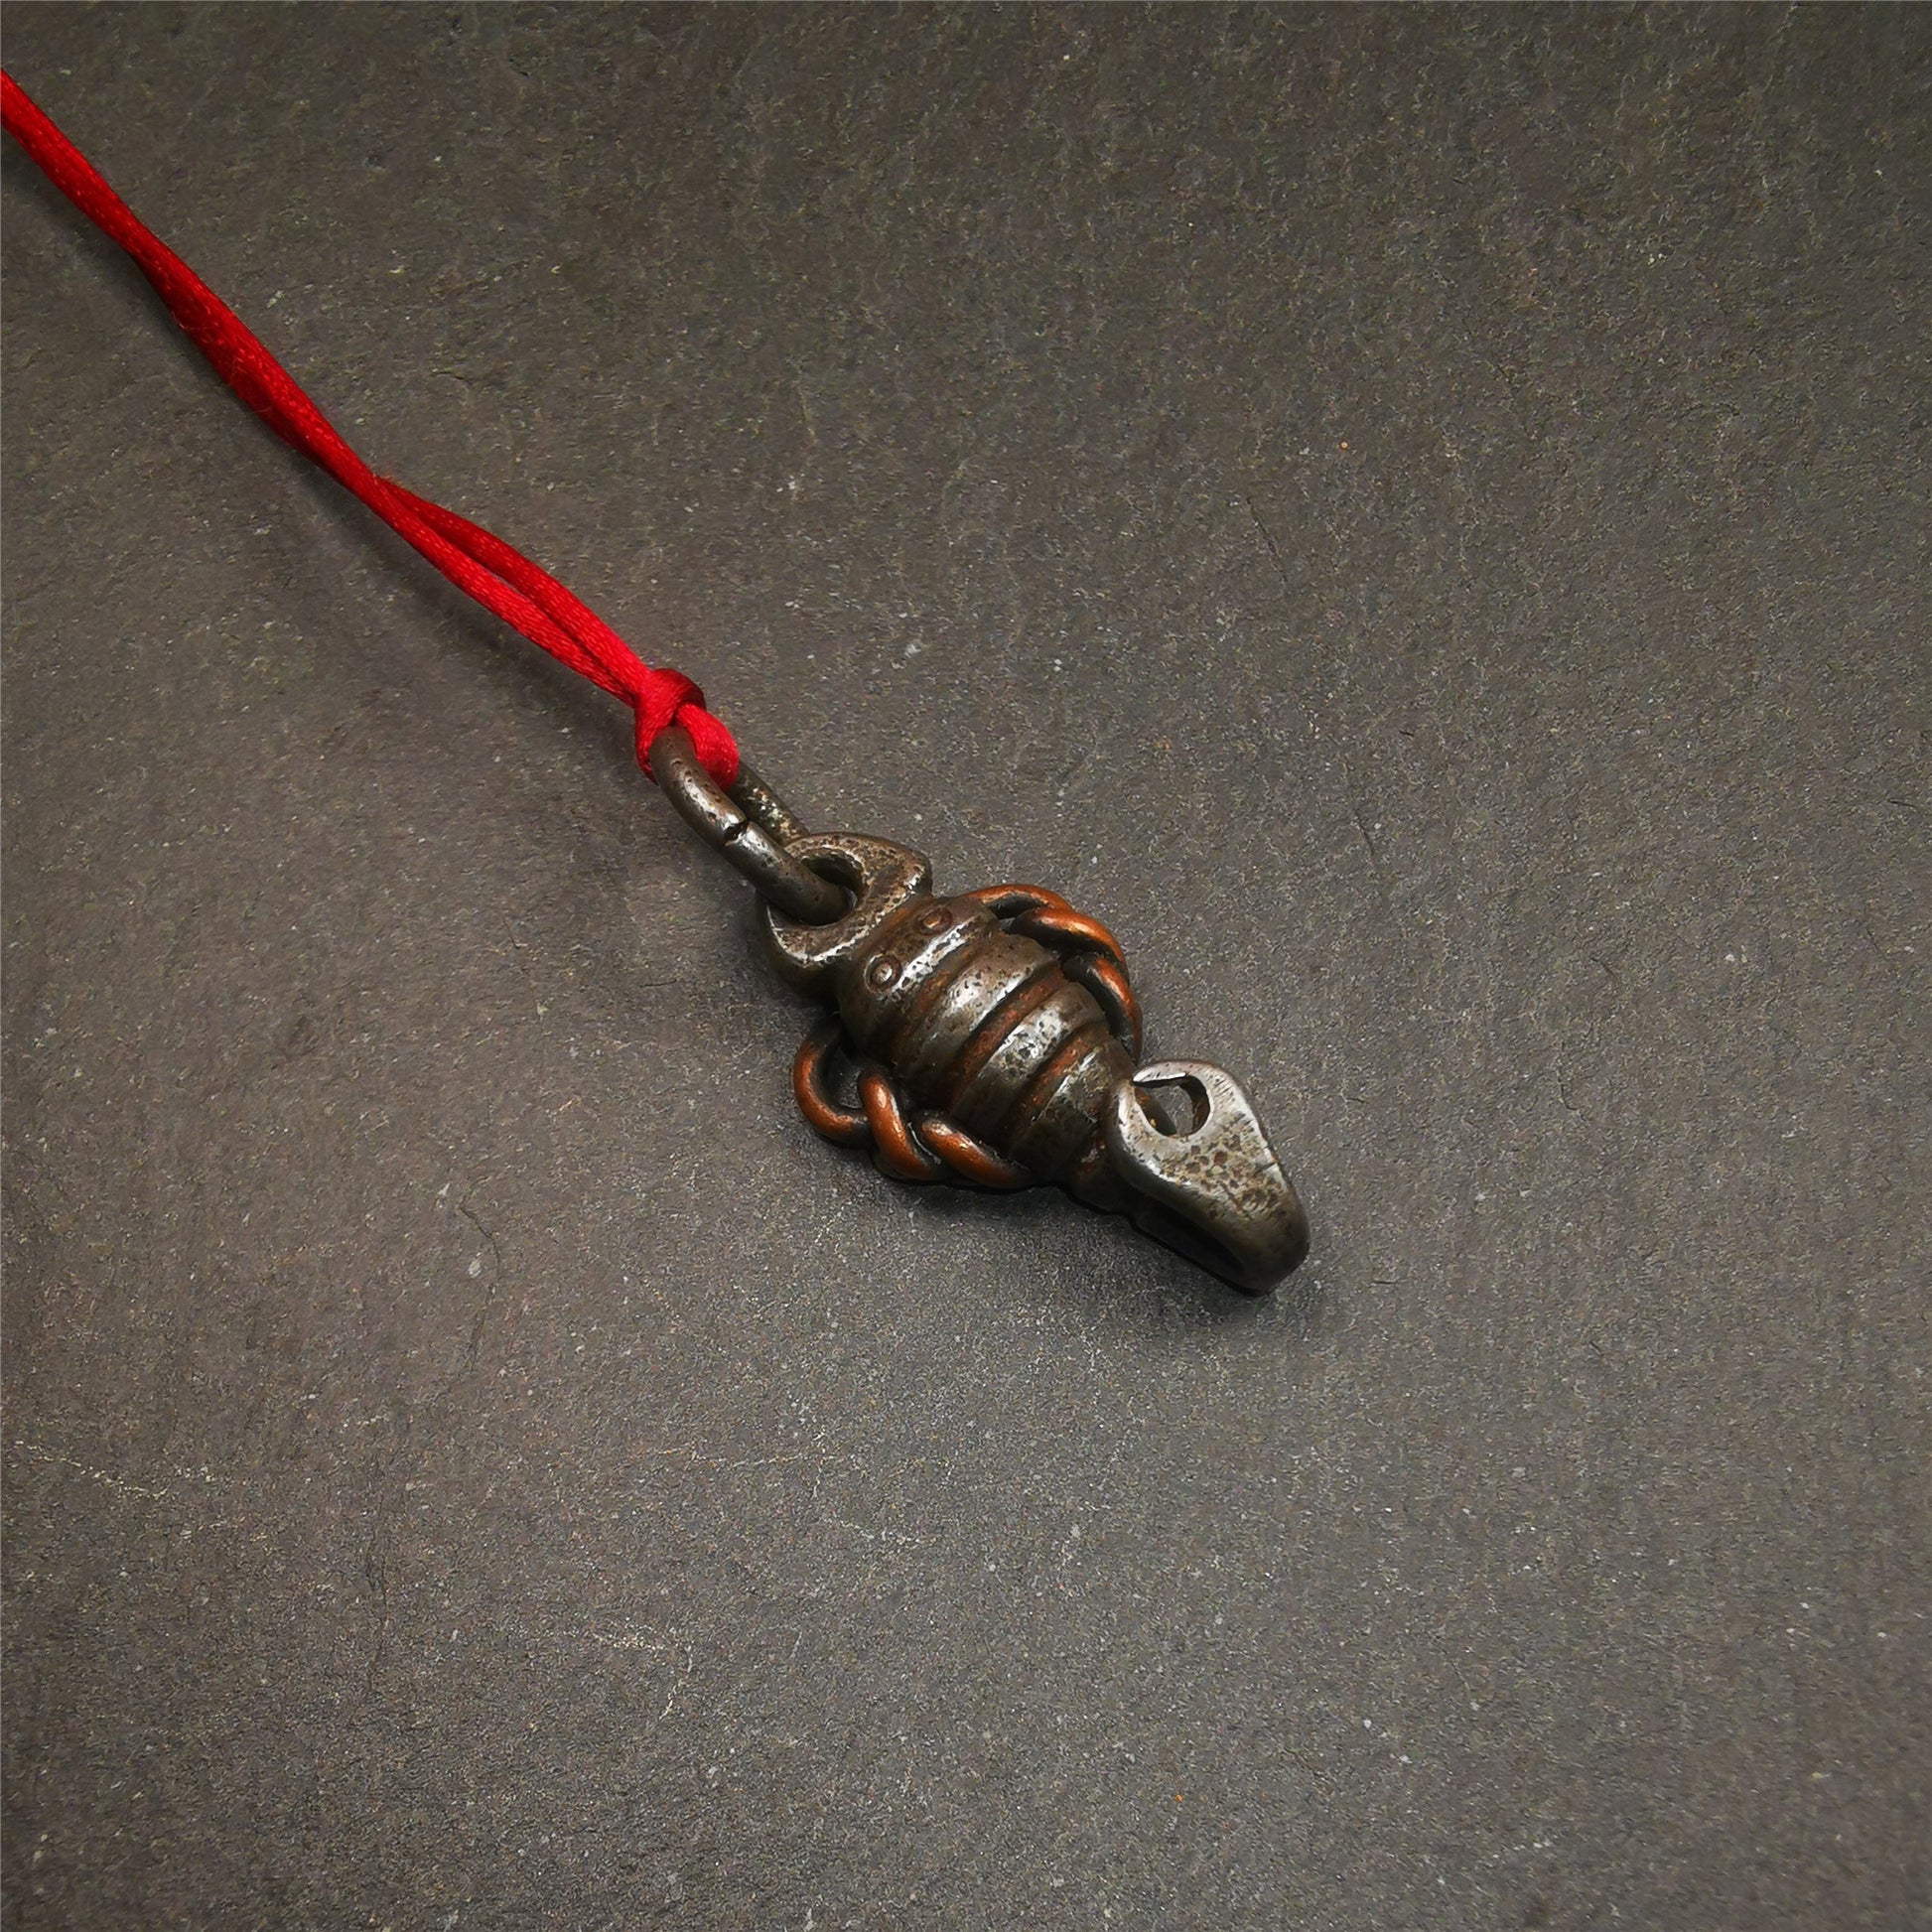 This scorpion amulet is made by Tibetan craftsmen in Hepo Township, Baiyu County, the birthplace of the famous Tibetan handicrafts. It is made of cold iron and copper,black color, size is 1.26 × 0.67 inches.The body is cold iron,and the legs are copper wire. You can make it into a necklace, or a keychain, or just put it in your shrine.